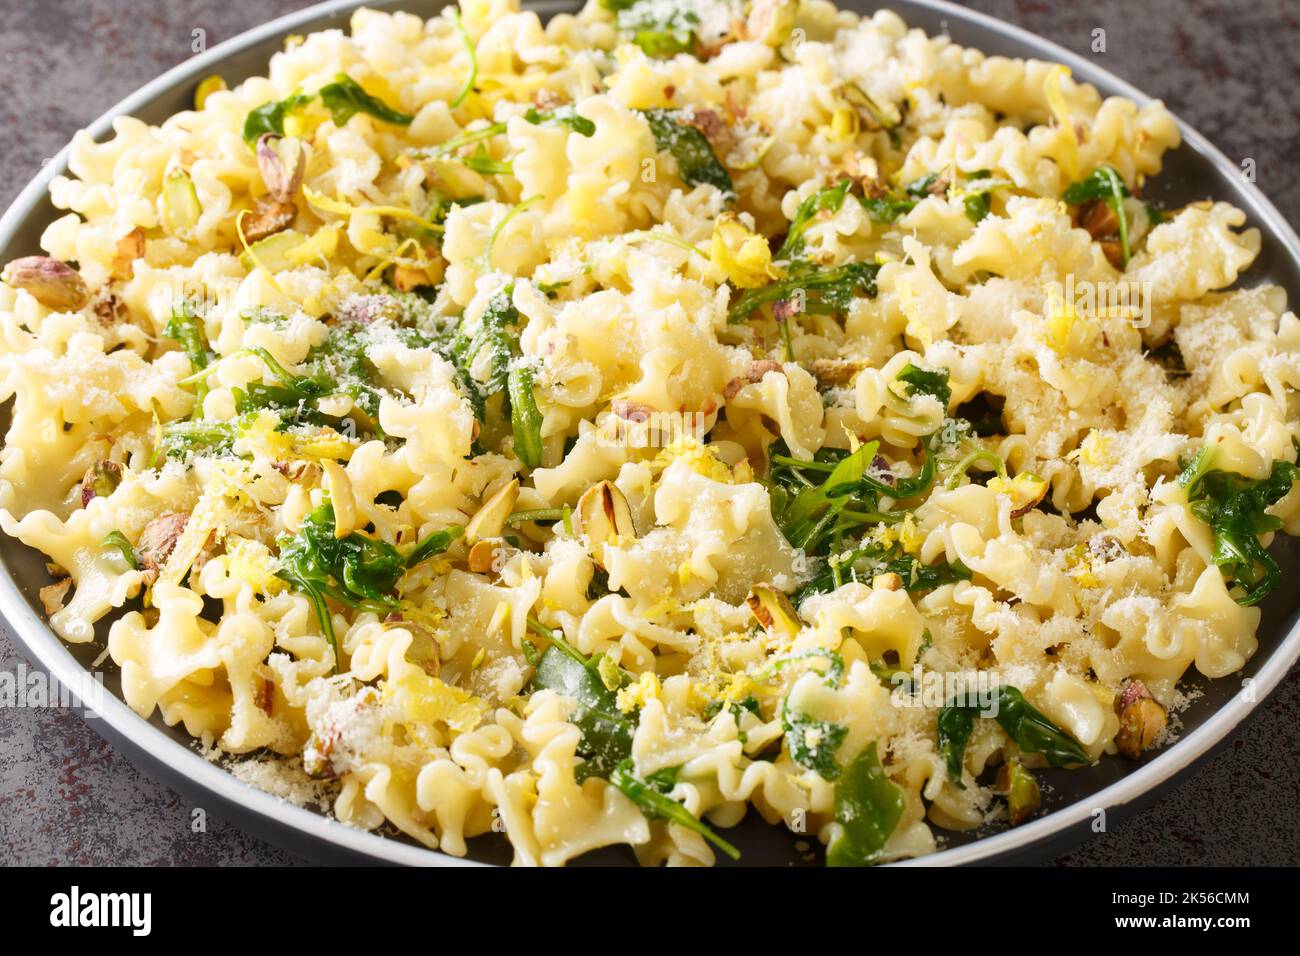 Italian pasta with arugula, pistachios, parmesan cheese and lemon zest close-up on a plate on the table. horizontal Stock Photo